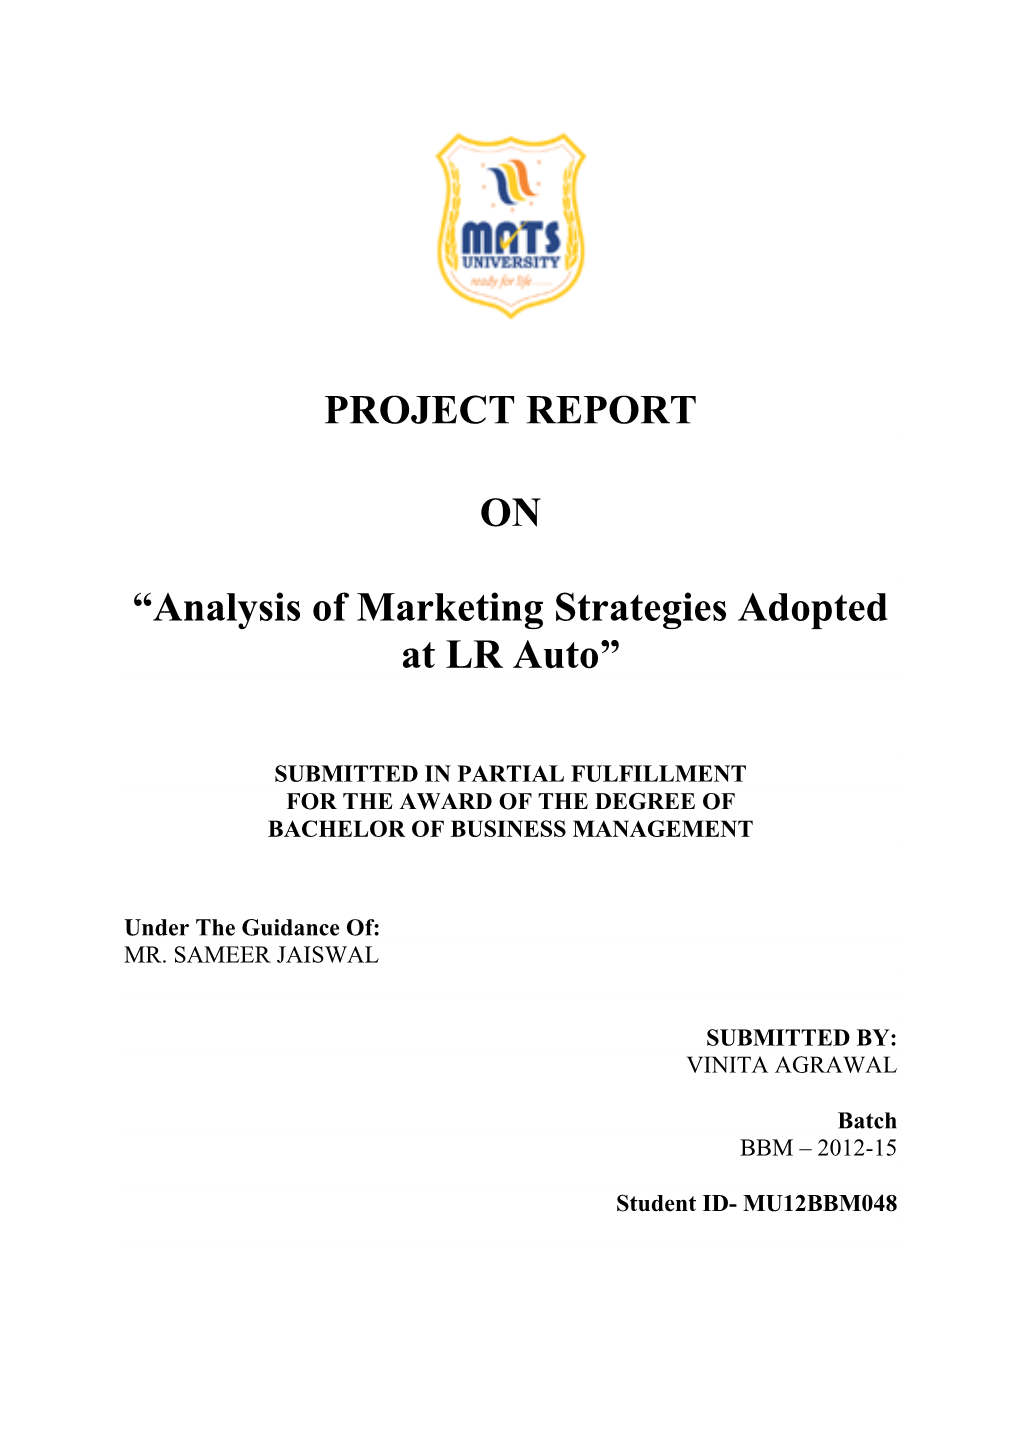 Analysis of Marketing Strategies Adopted at LR Auto”